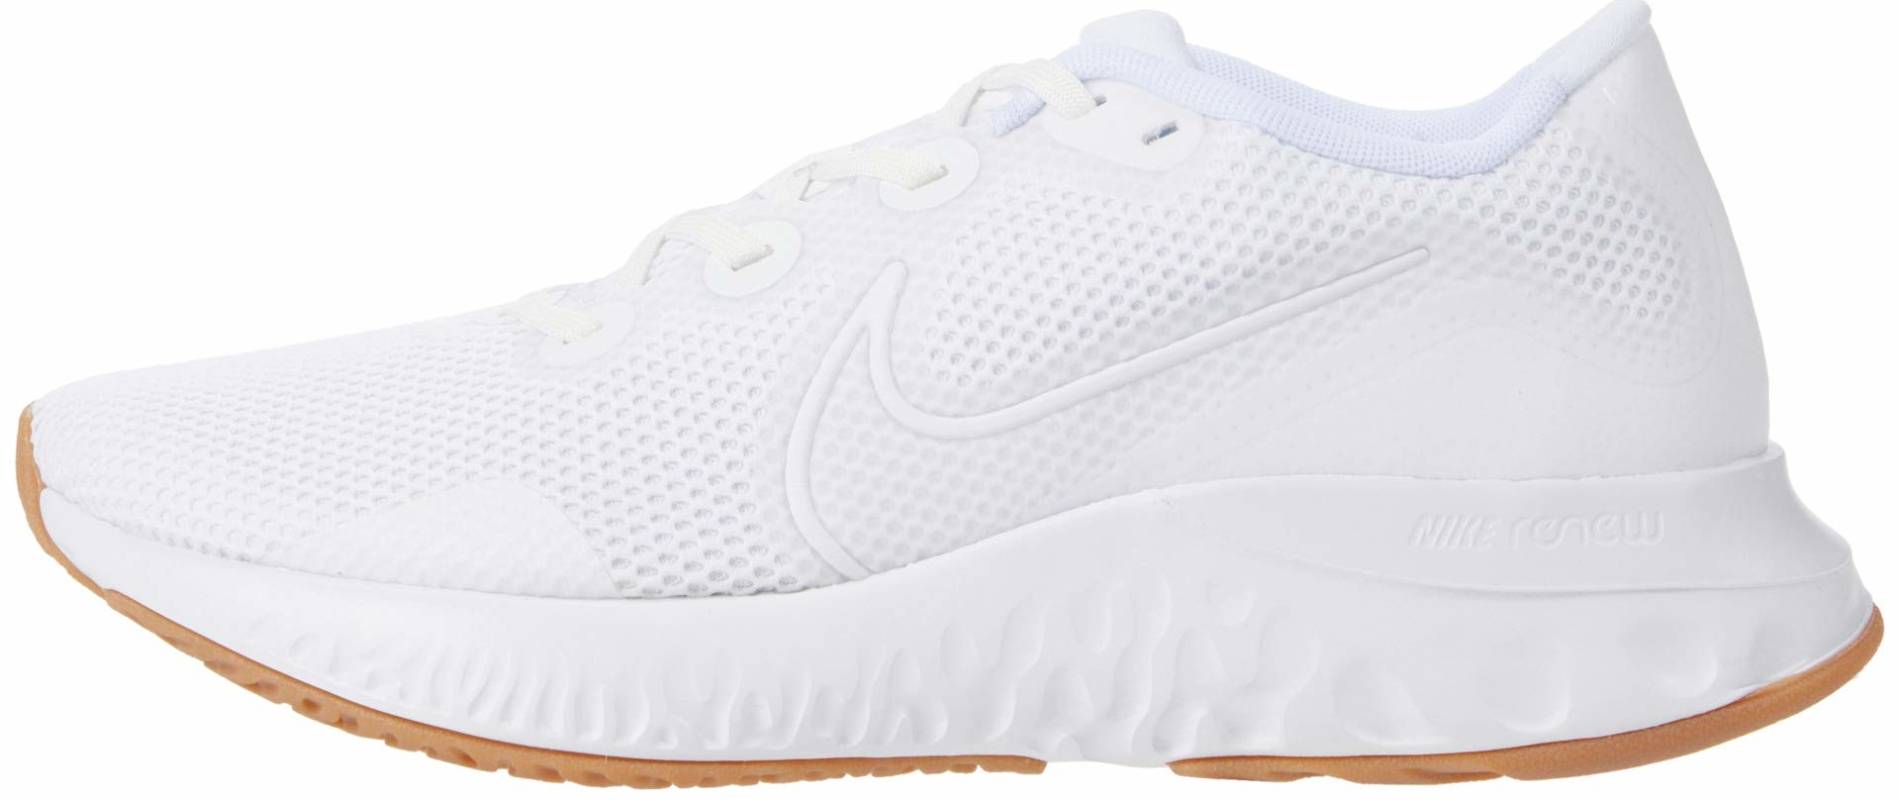 all white nike running shoes